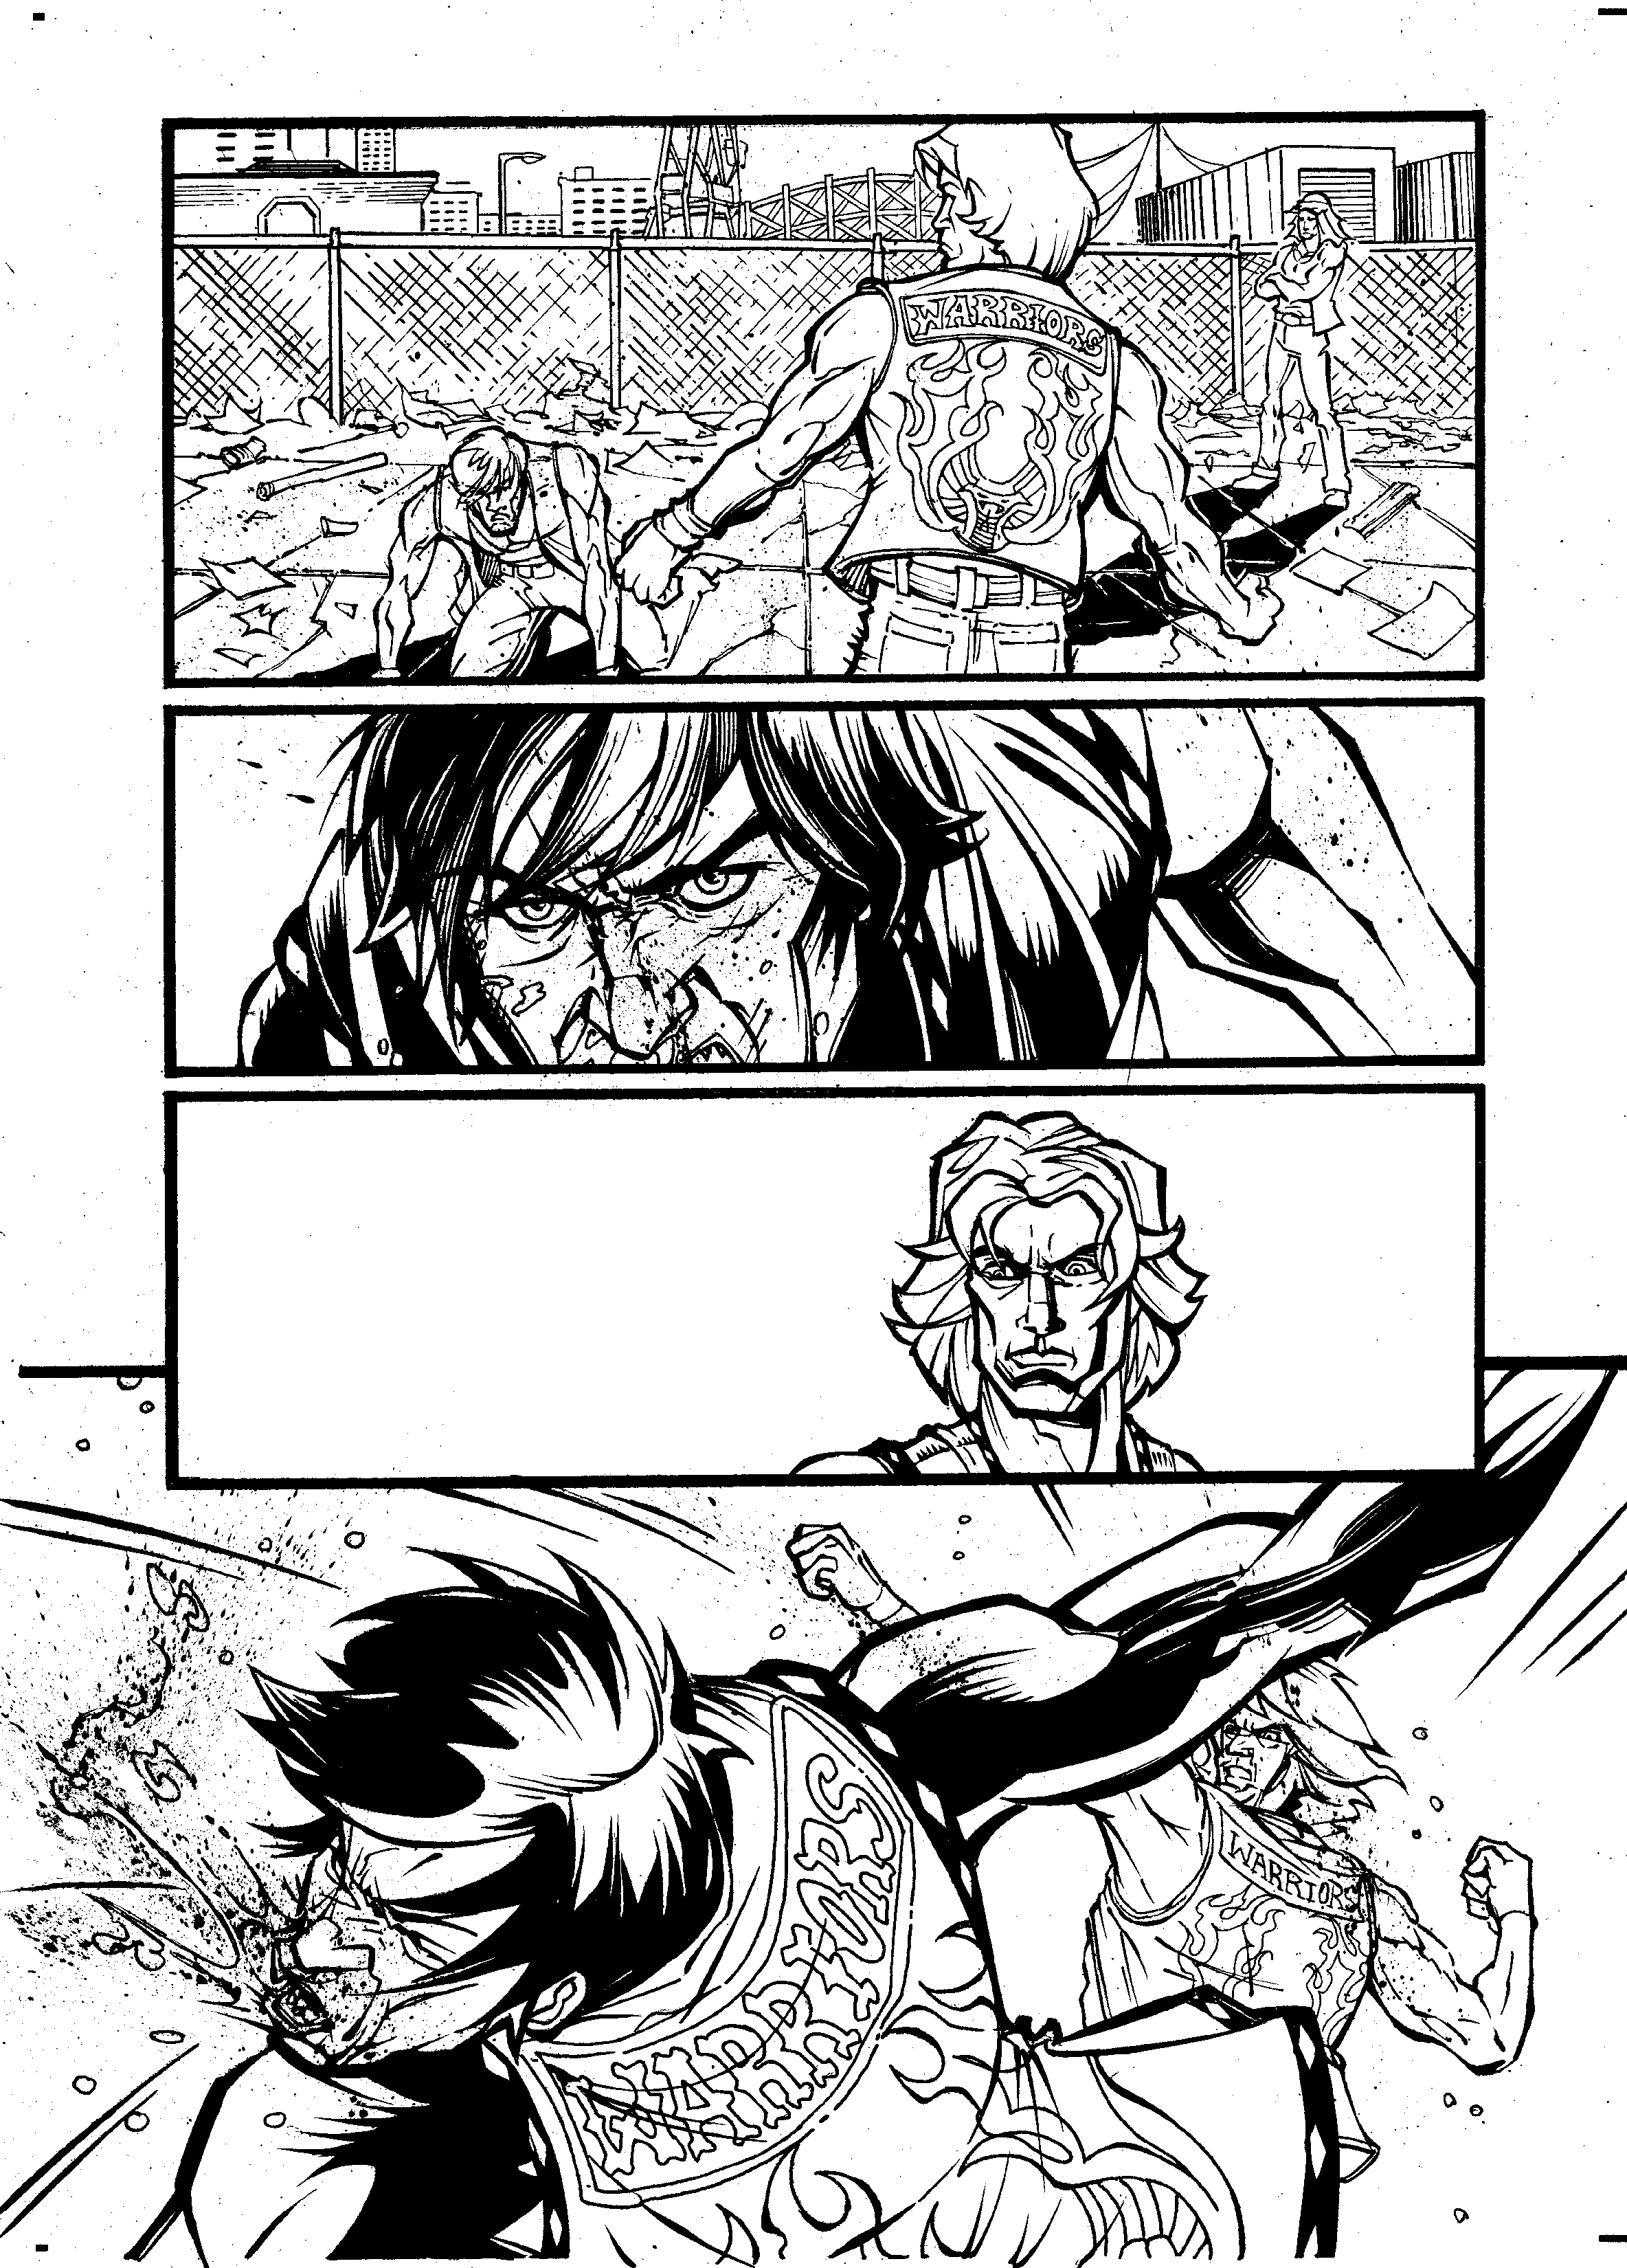 Page 2 with inks from Tom Feister